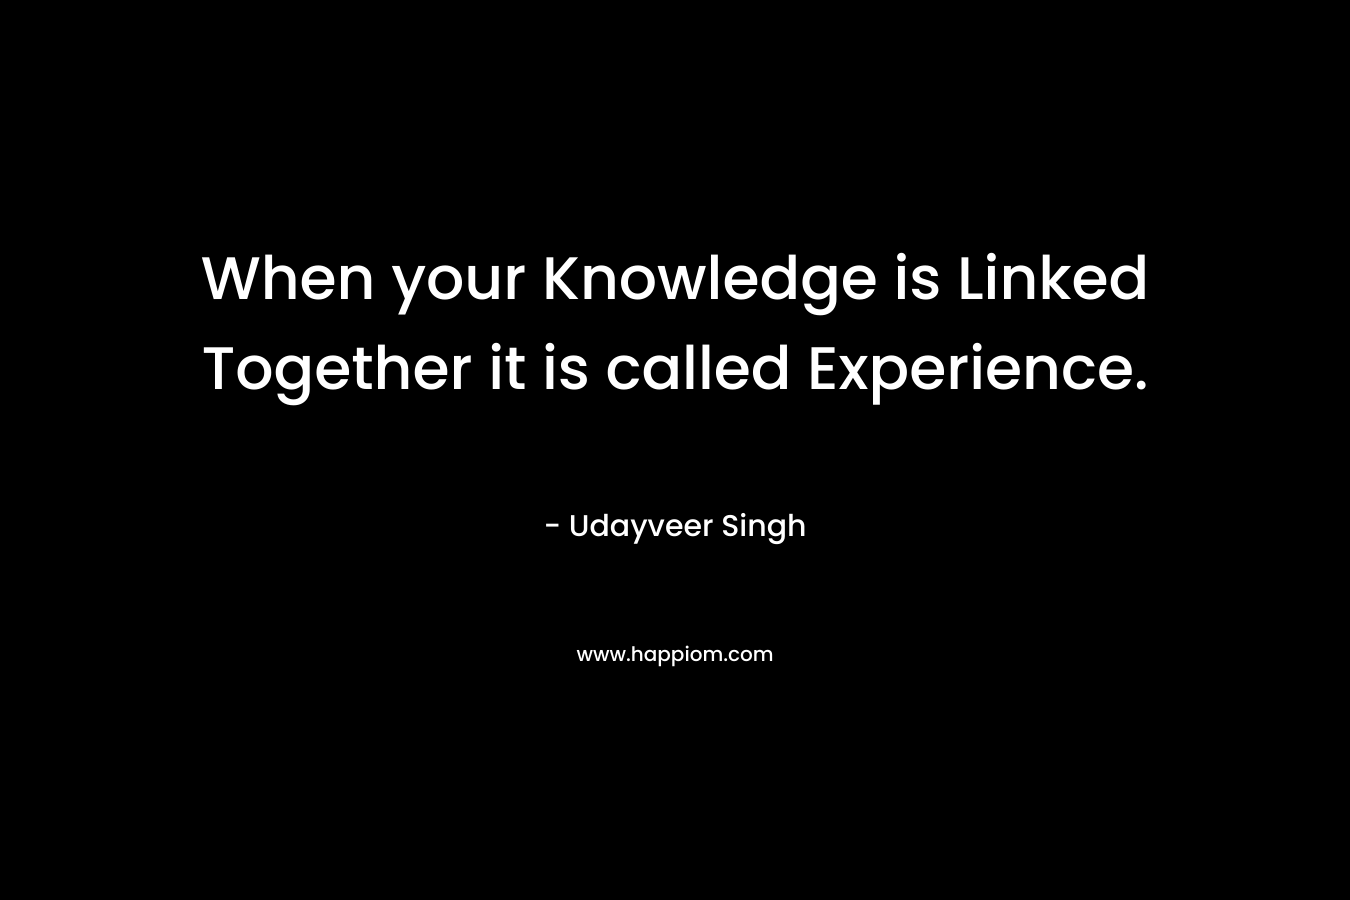 When your Knowledge is Linked Together it is called Experience.